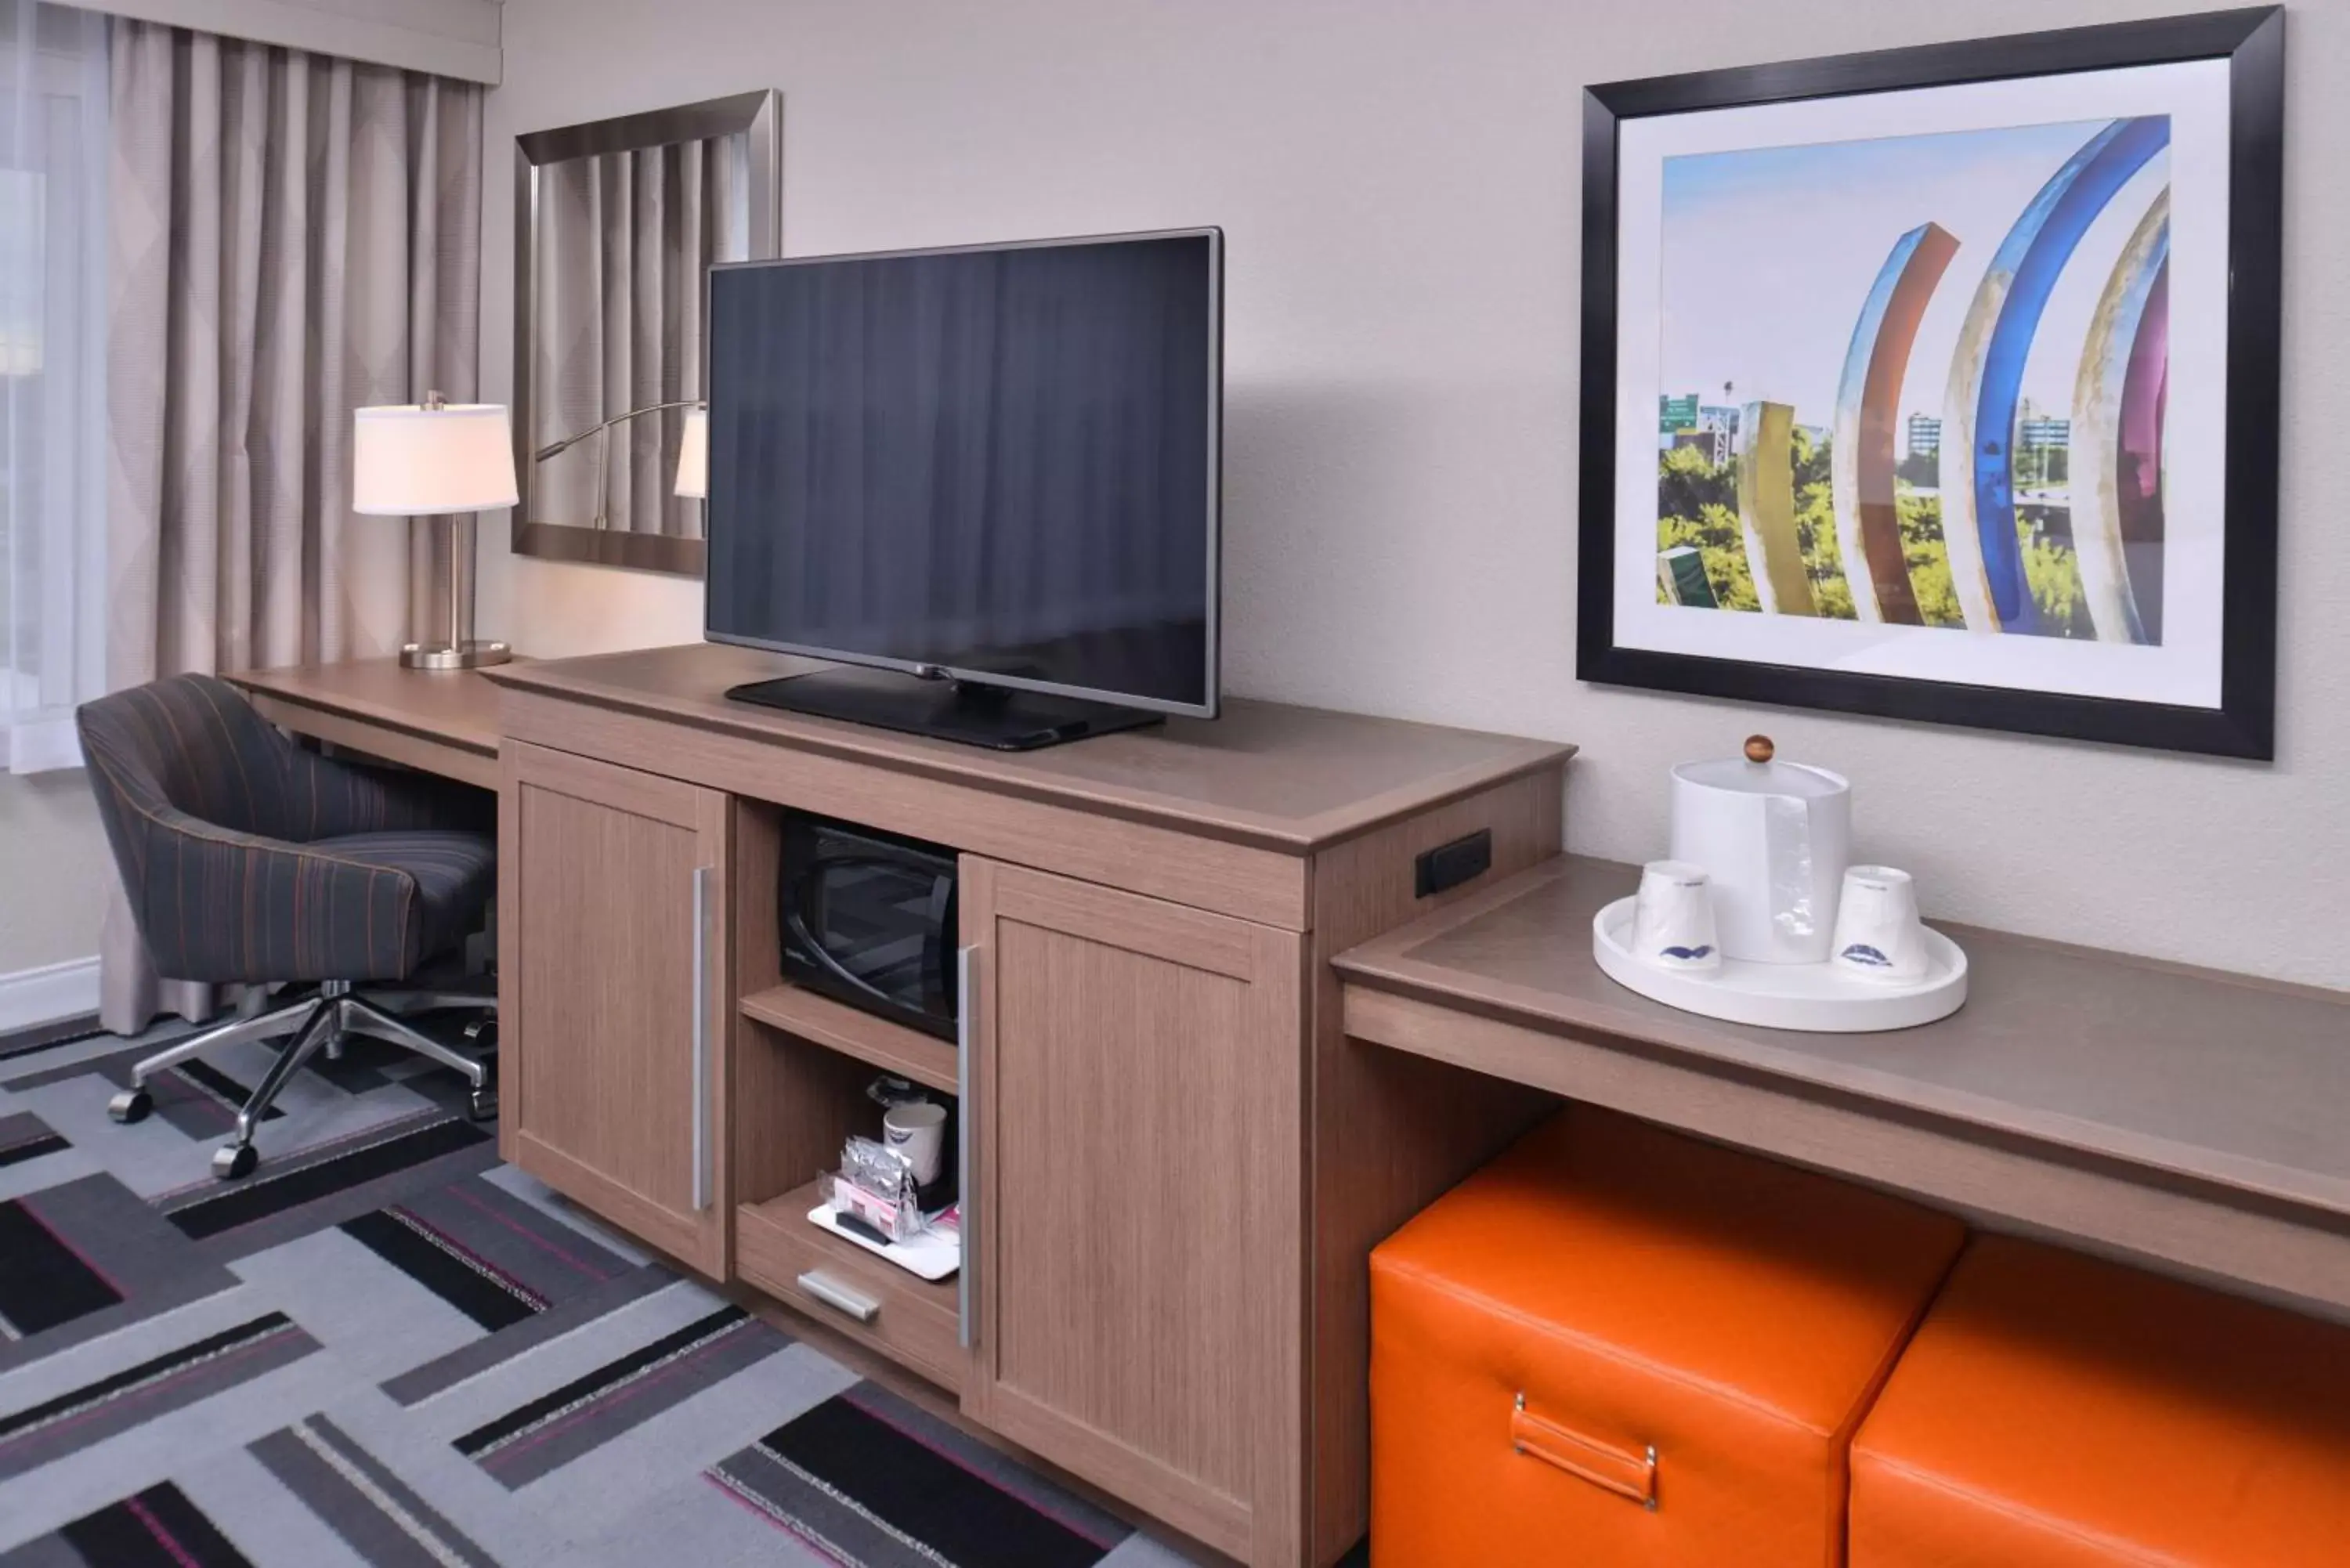 Bed, TV/Entertainment Center in Hampton Inn and Suites Ames, IA